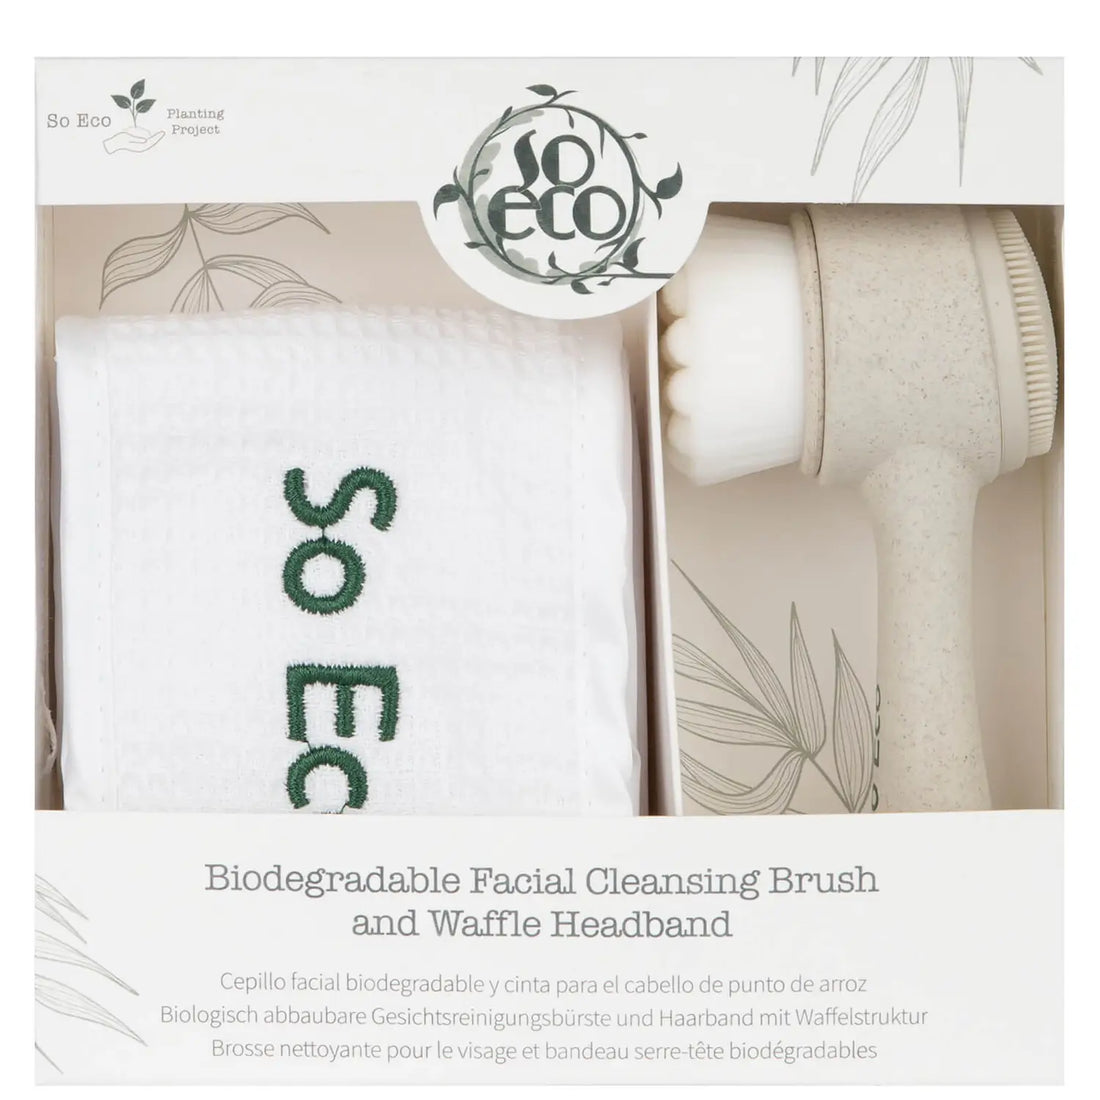 So Eco Biodegradable Facial Cleansing Brush and Waffle Headband Sets